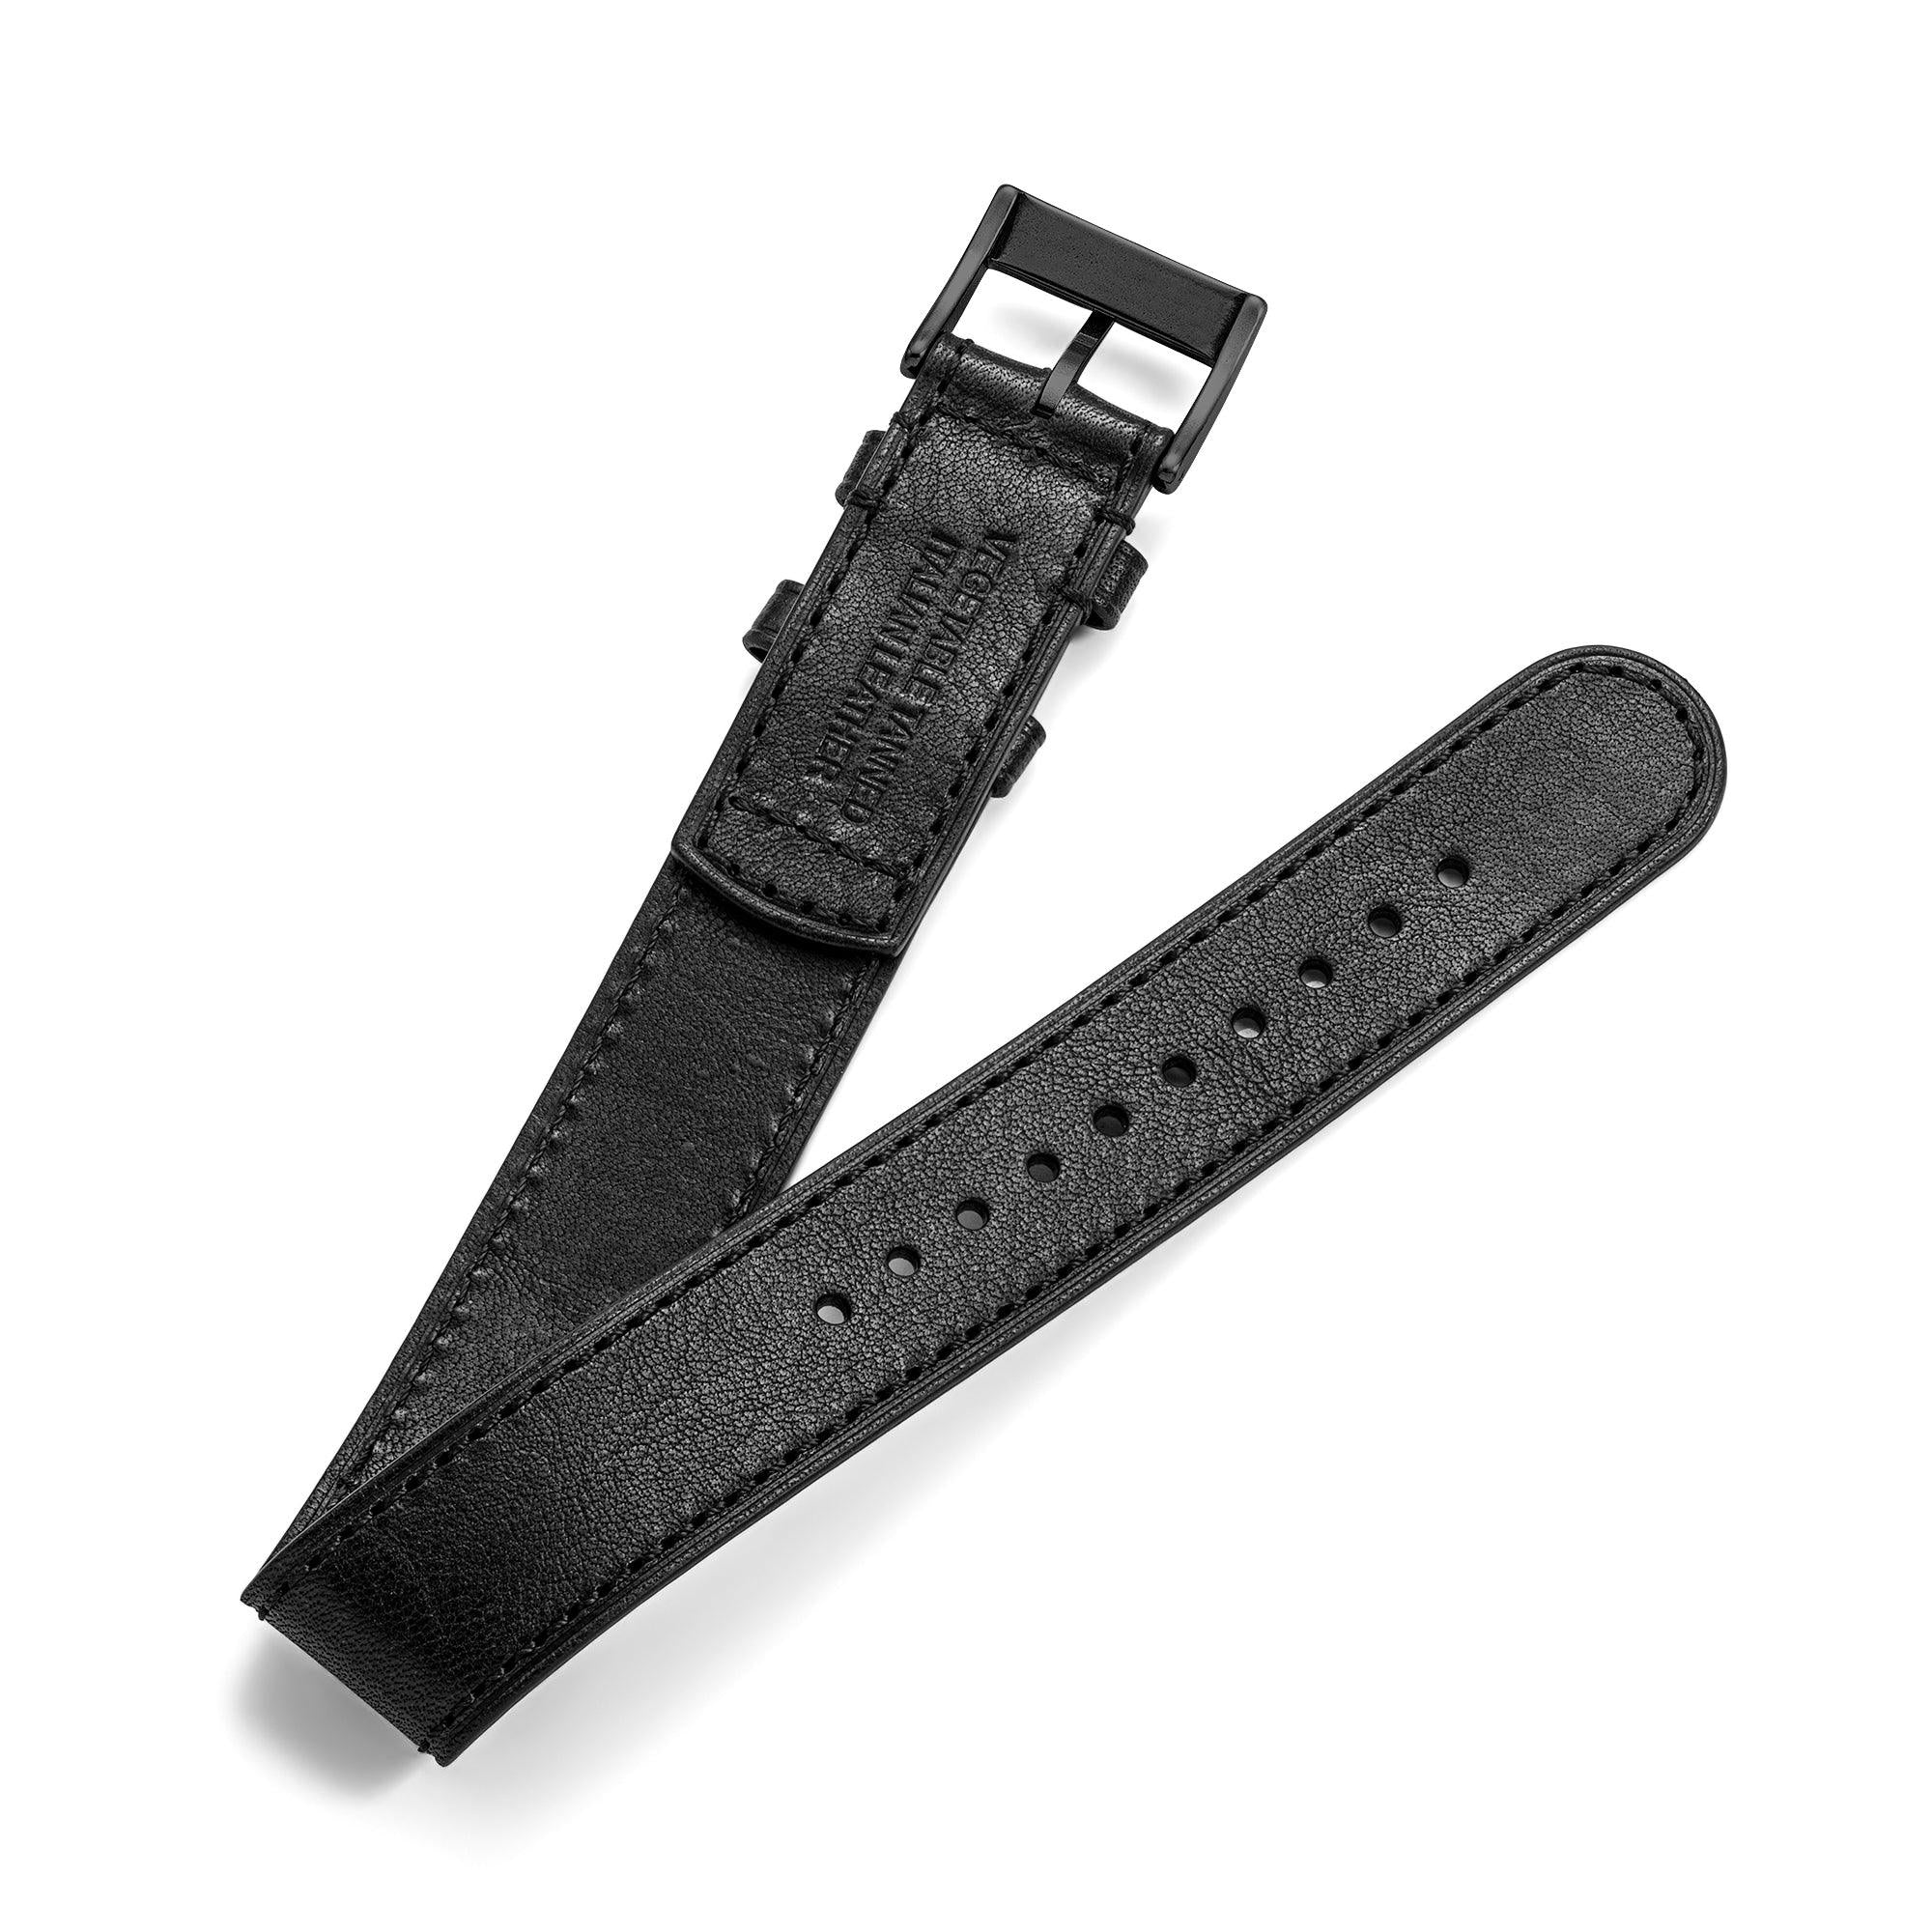 One-Piece Black Leather Band & Black PVD Buckle